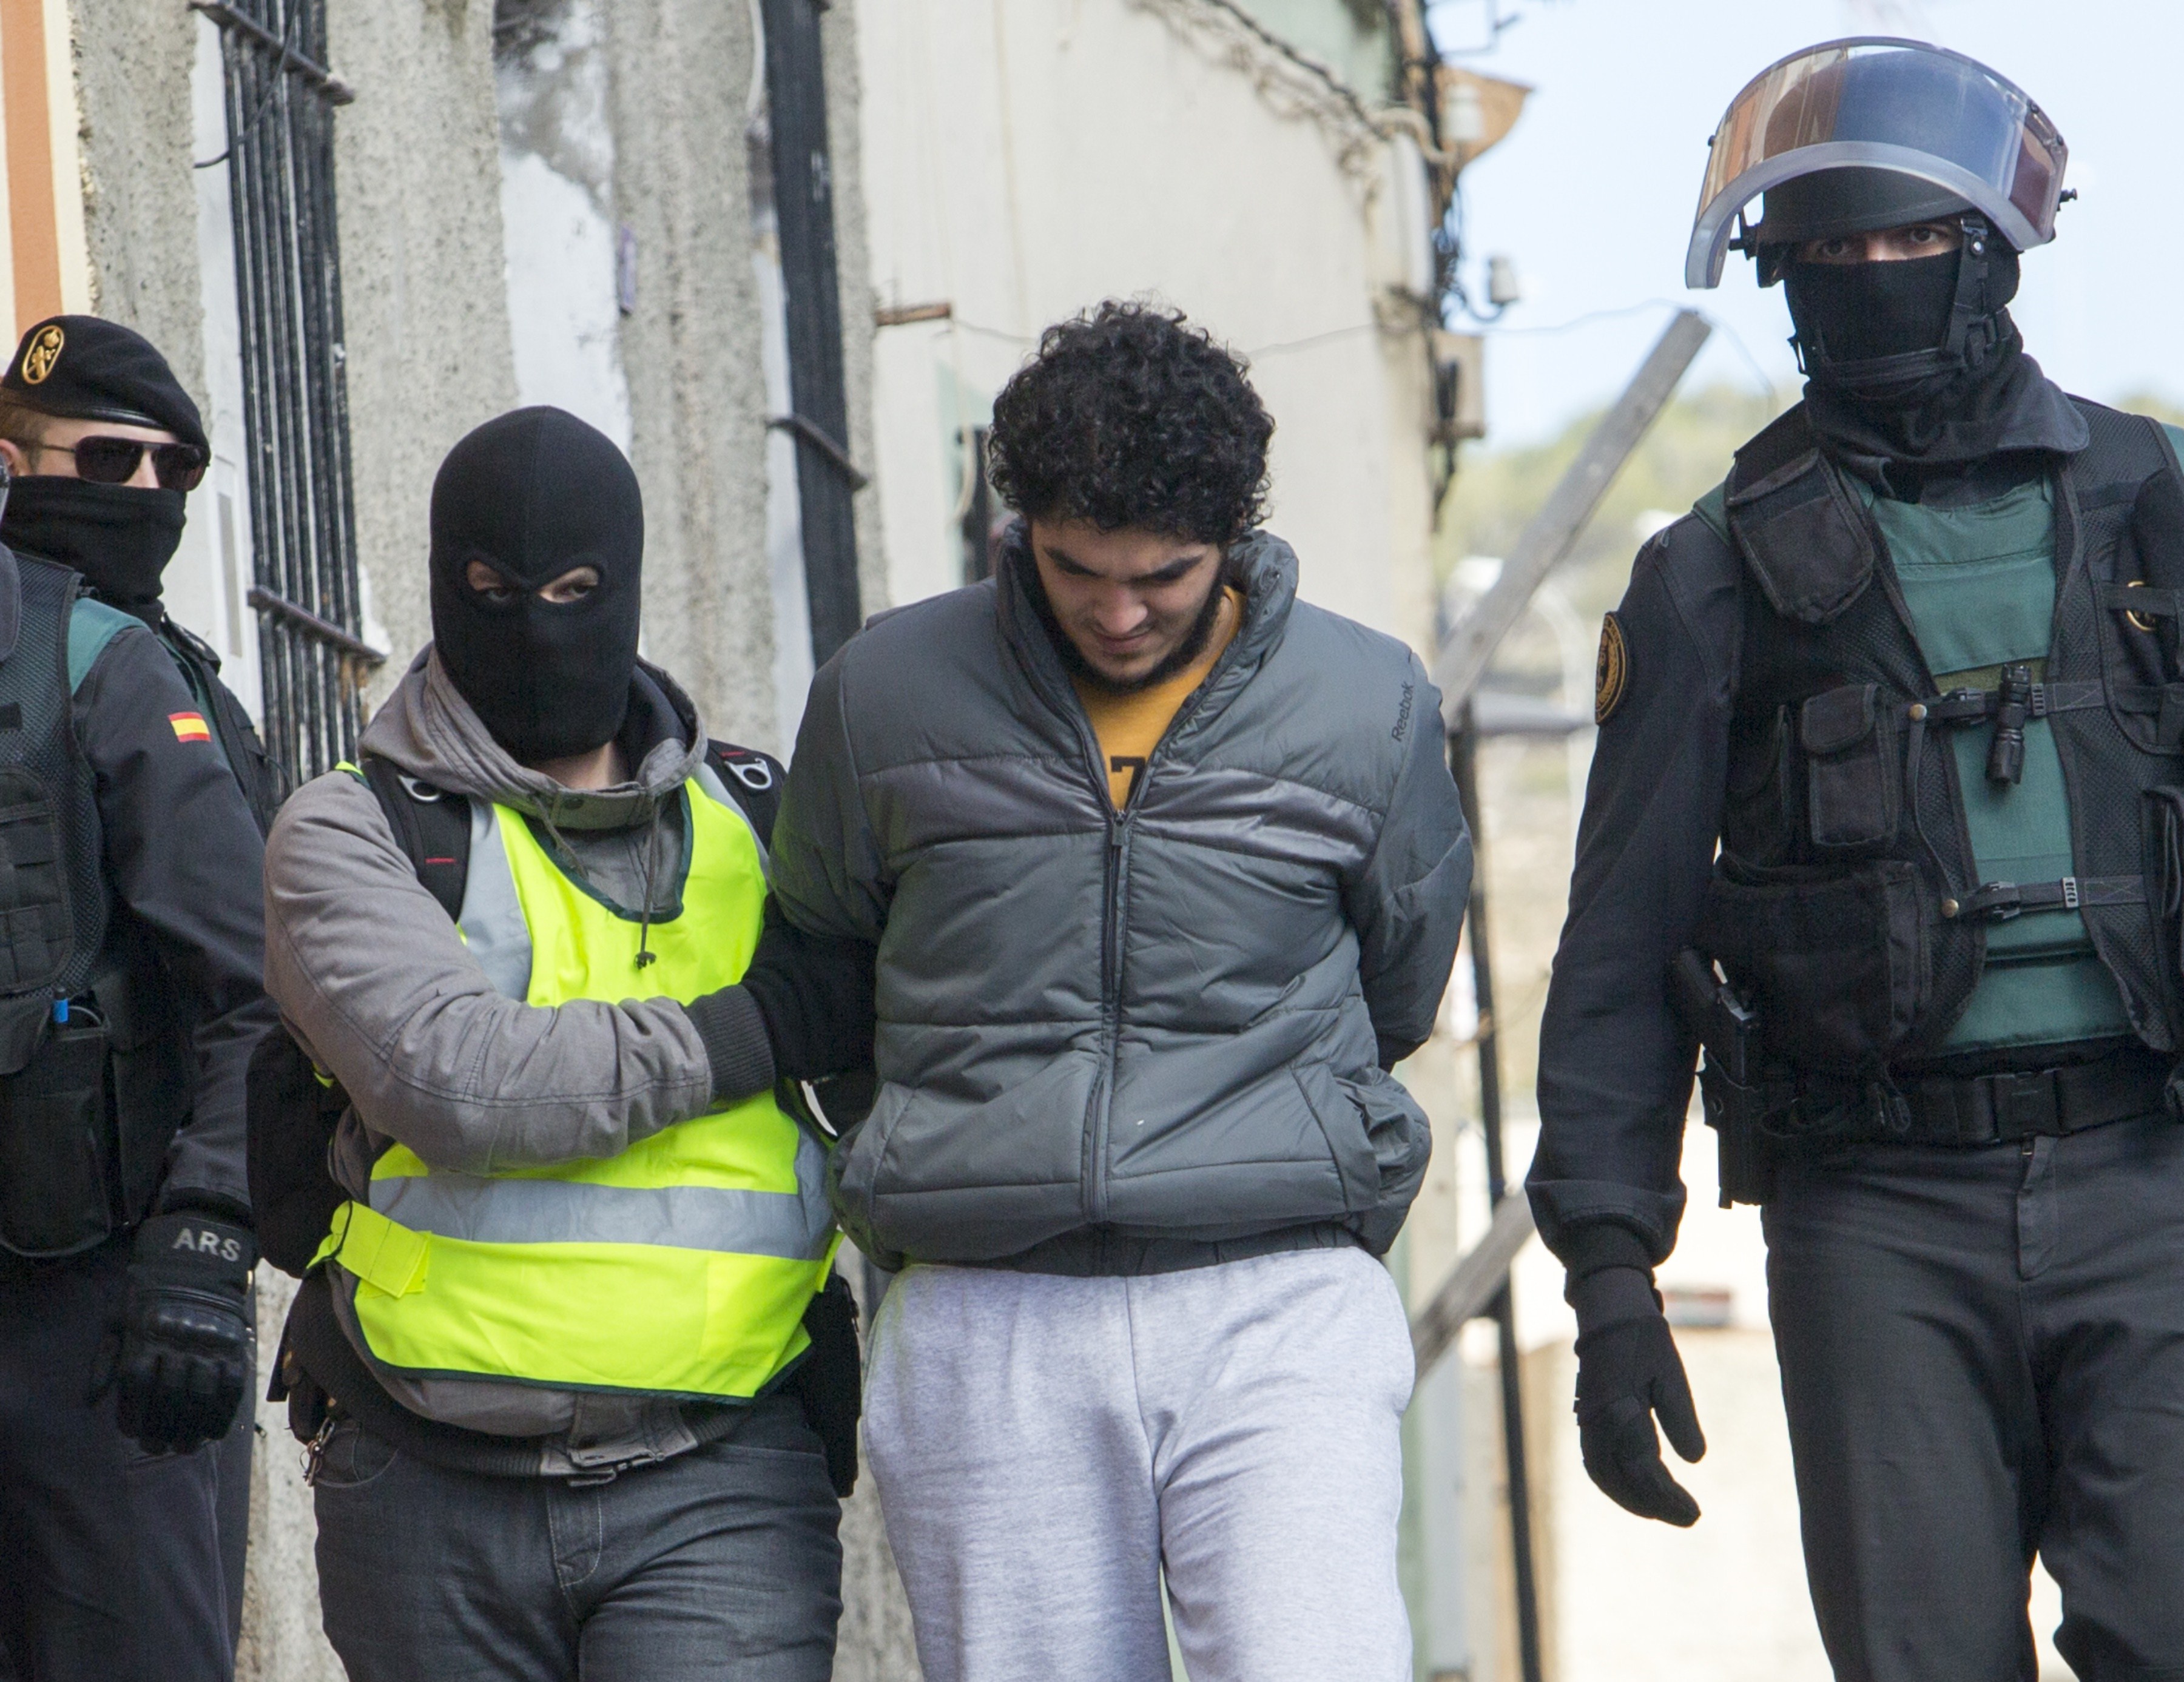 One of four people suspected of creating and operating several Internet platforms spreading propaganda, particularly for the Islamic State group in a bid to recruit young women to join Islamic State militants is arrested in Melilla, Spain, on February 24, 2015. (Angela Rios—AFP/Getty Images)